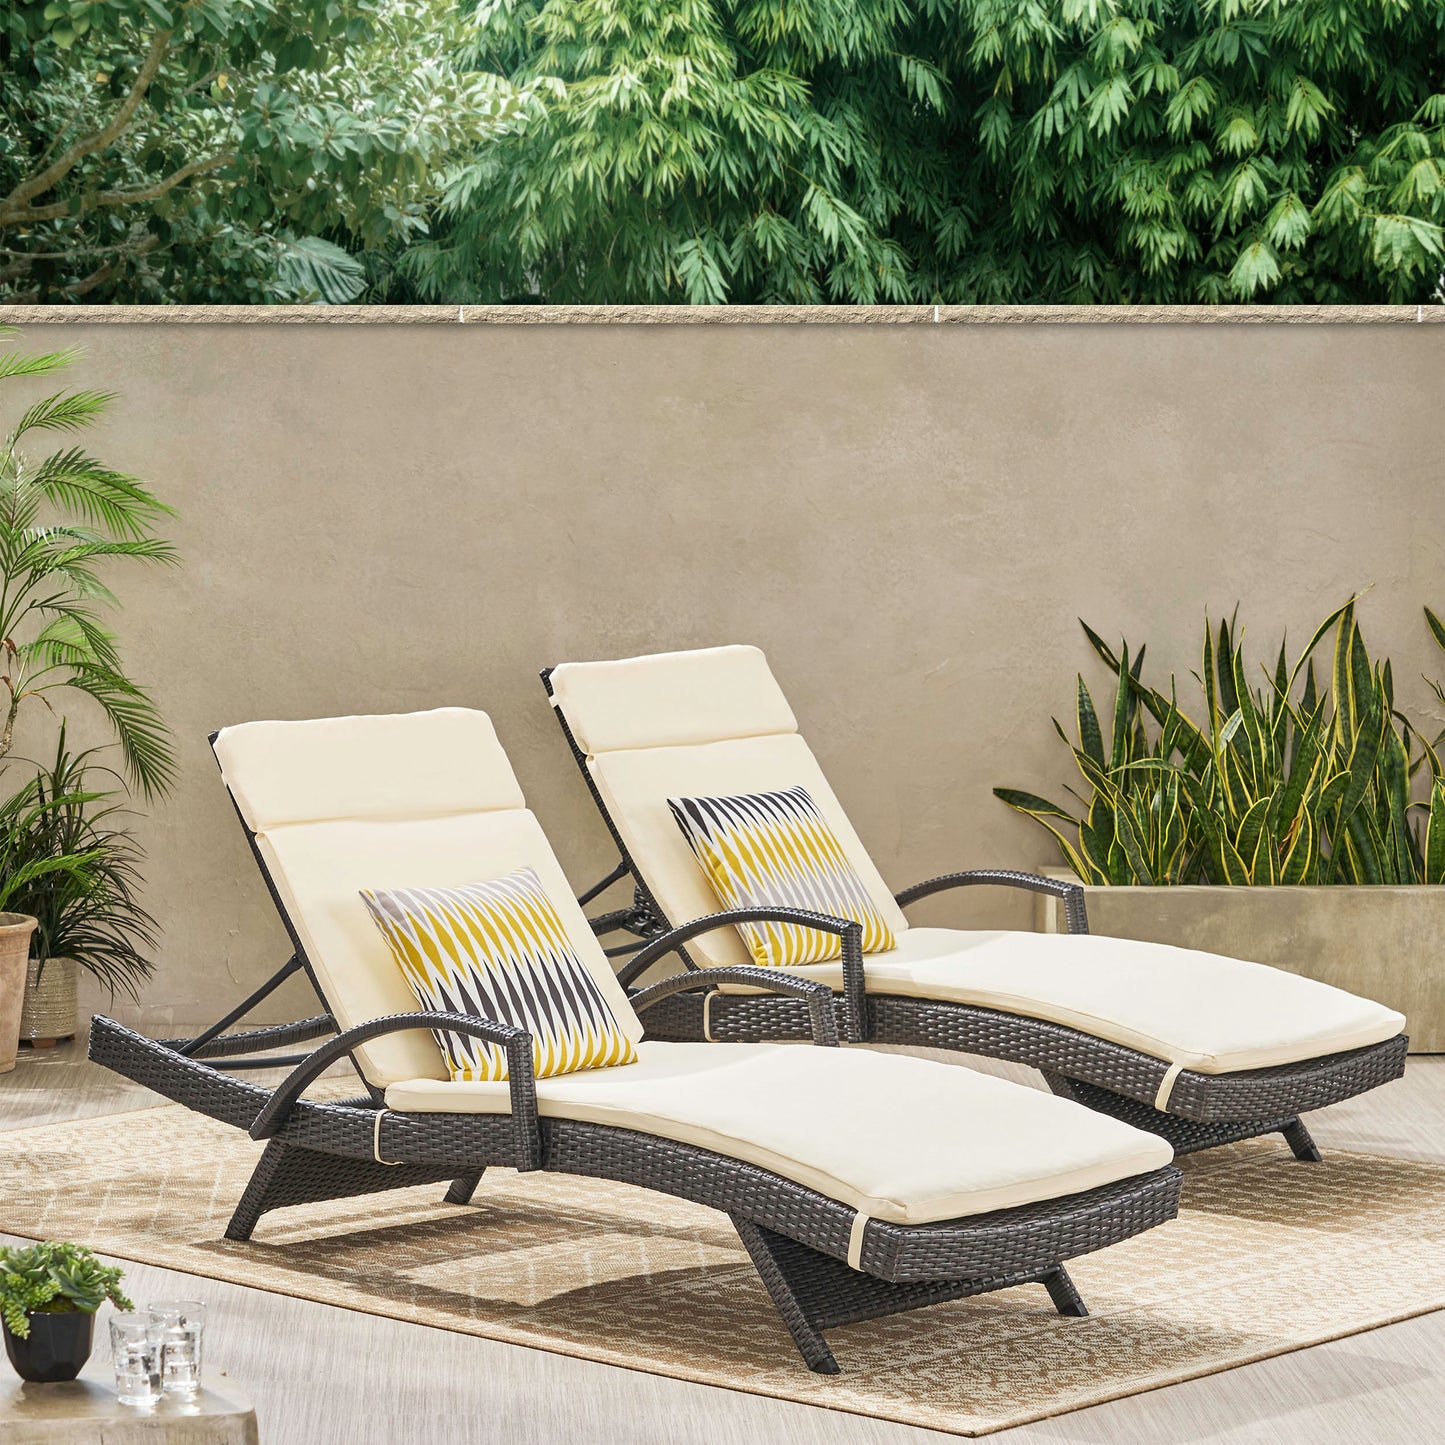 Soleil Outdoor Wicker Chaise Lounges w/ Water Resistant Cushions (Set of 2)